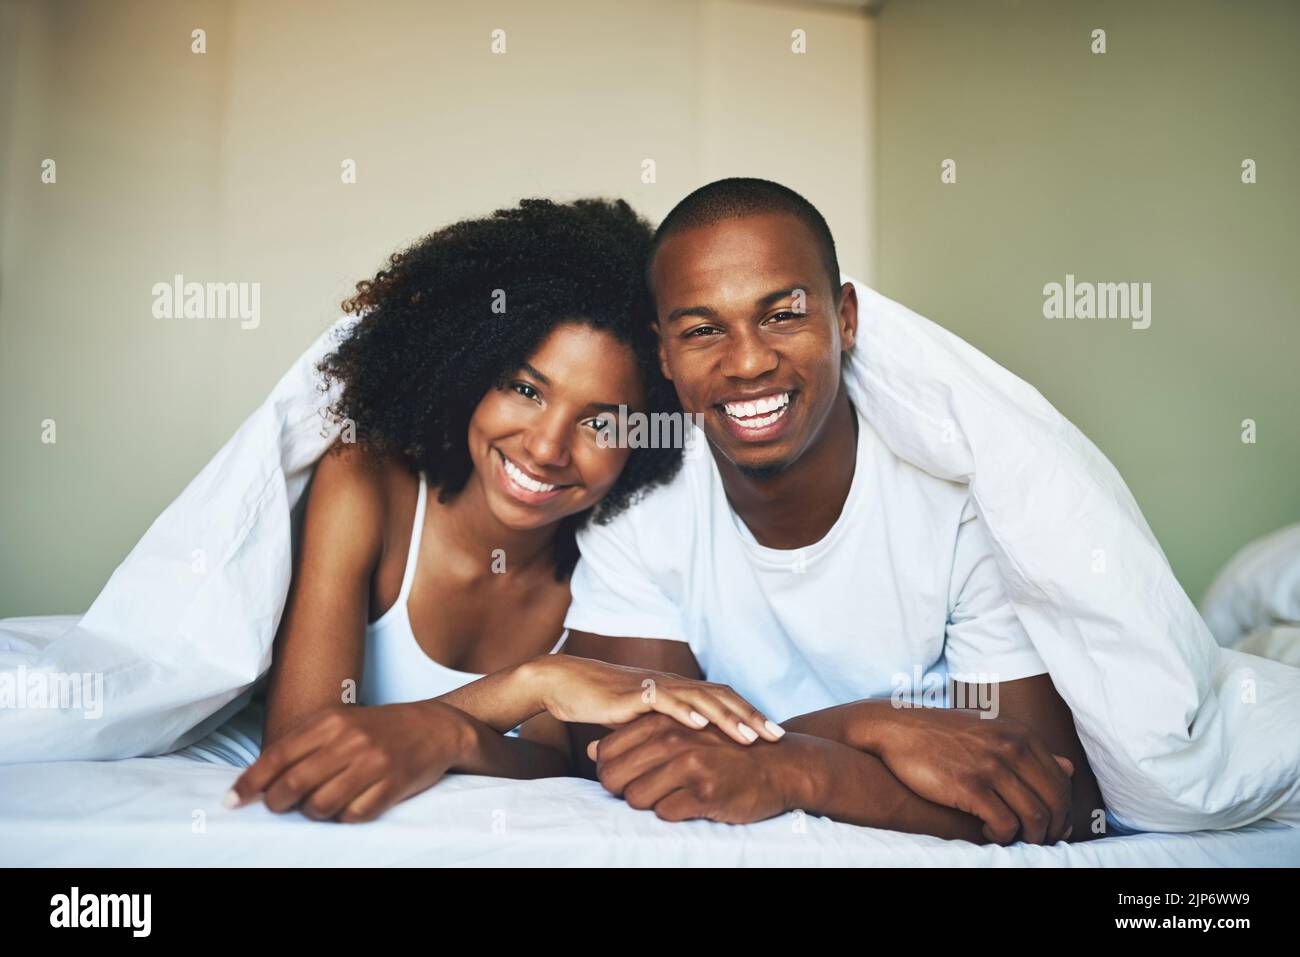 This is how we do weekends. Portrait of a happy young couple relaxing under a duvet in their bedroom. Stock Photo